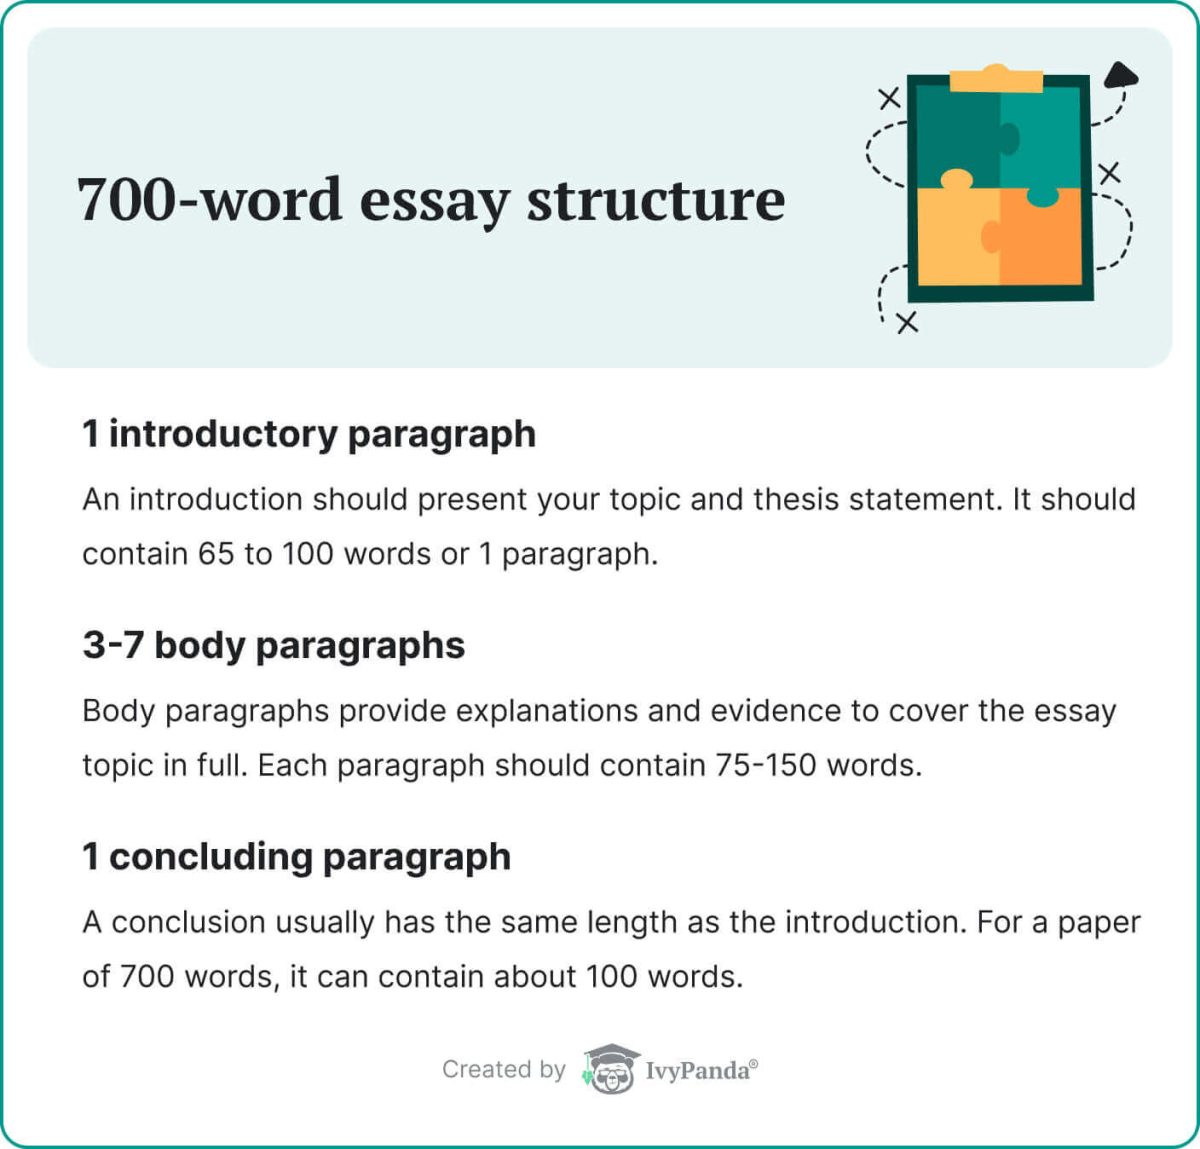 how long does it take to write 700 words essay